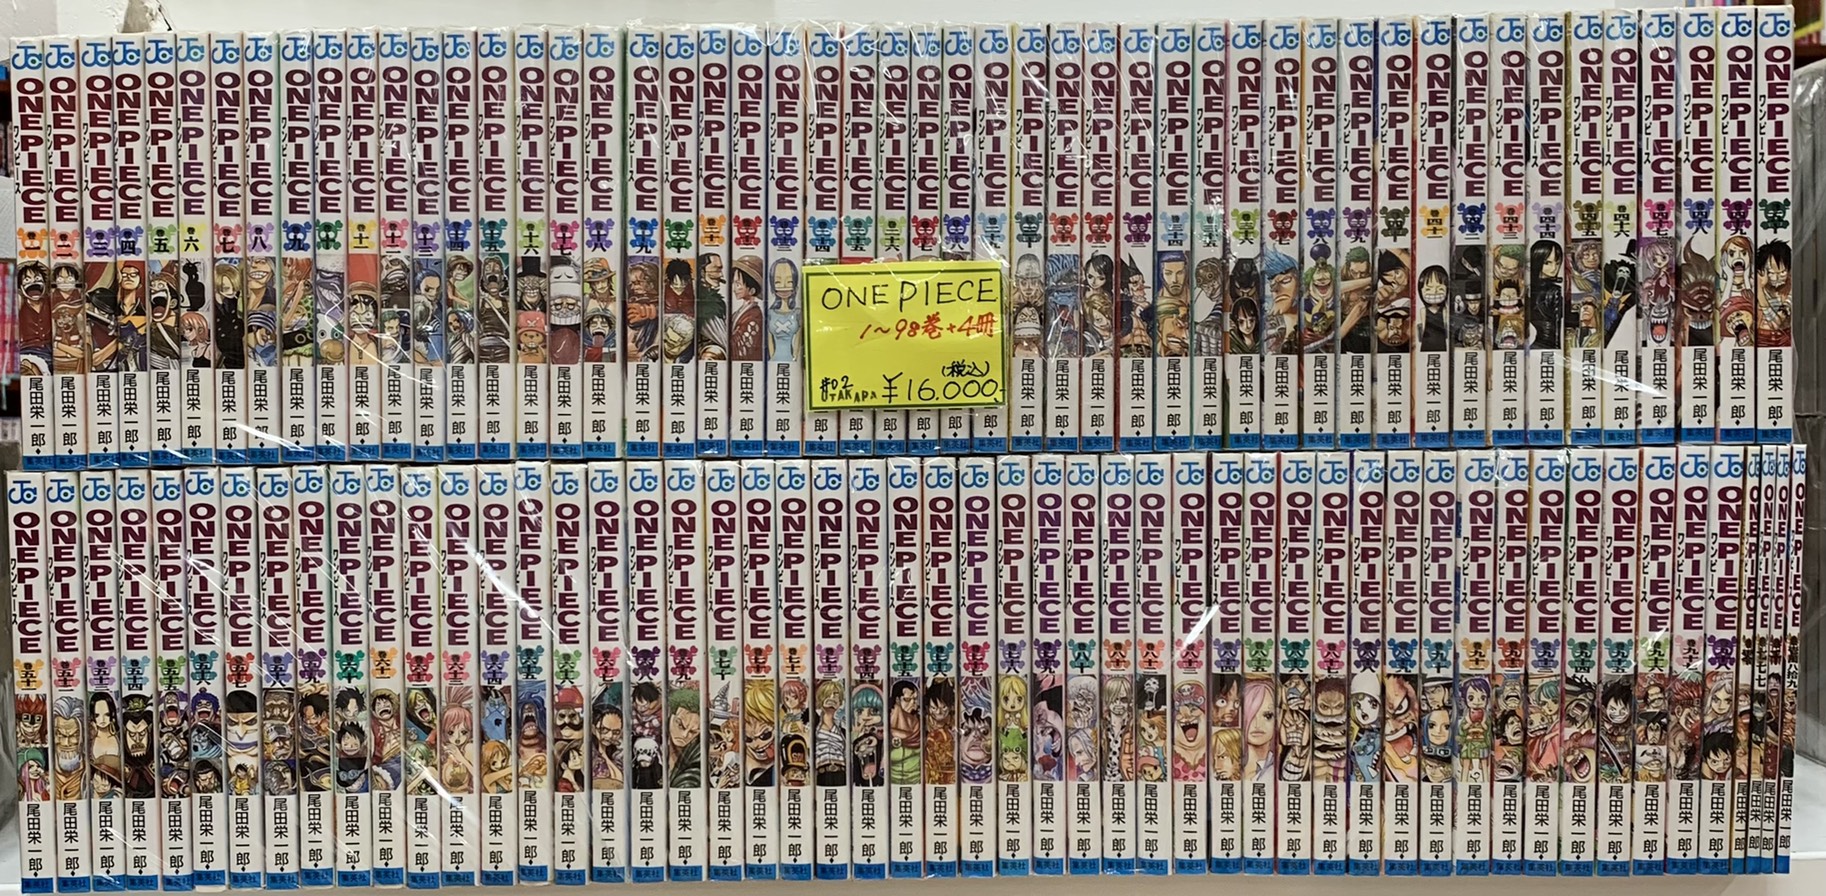 7/6★ONE PIECE 98巻＋4冊セット お持ち頂きました！★ | おたちゅう(旧お宝中古市場) 沼津店